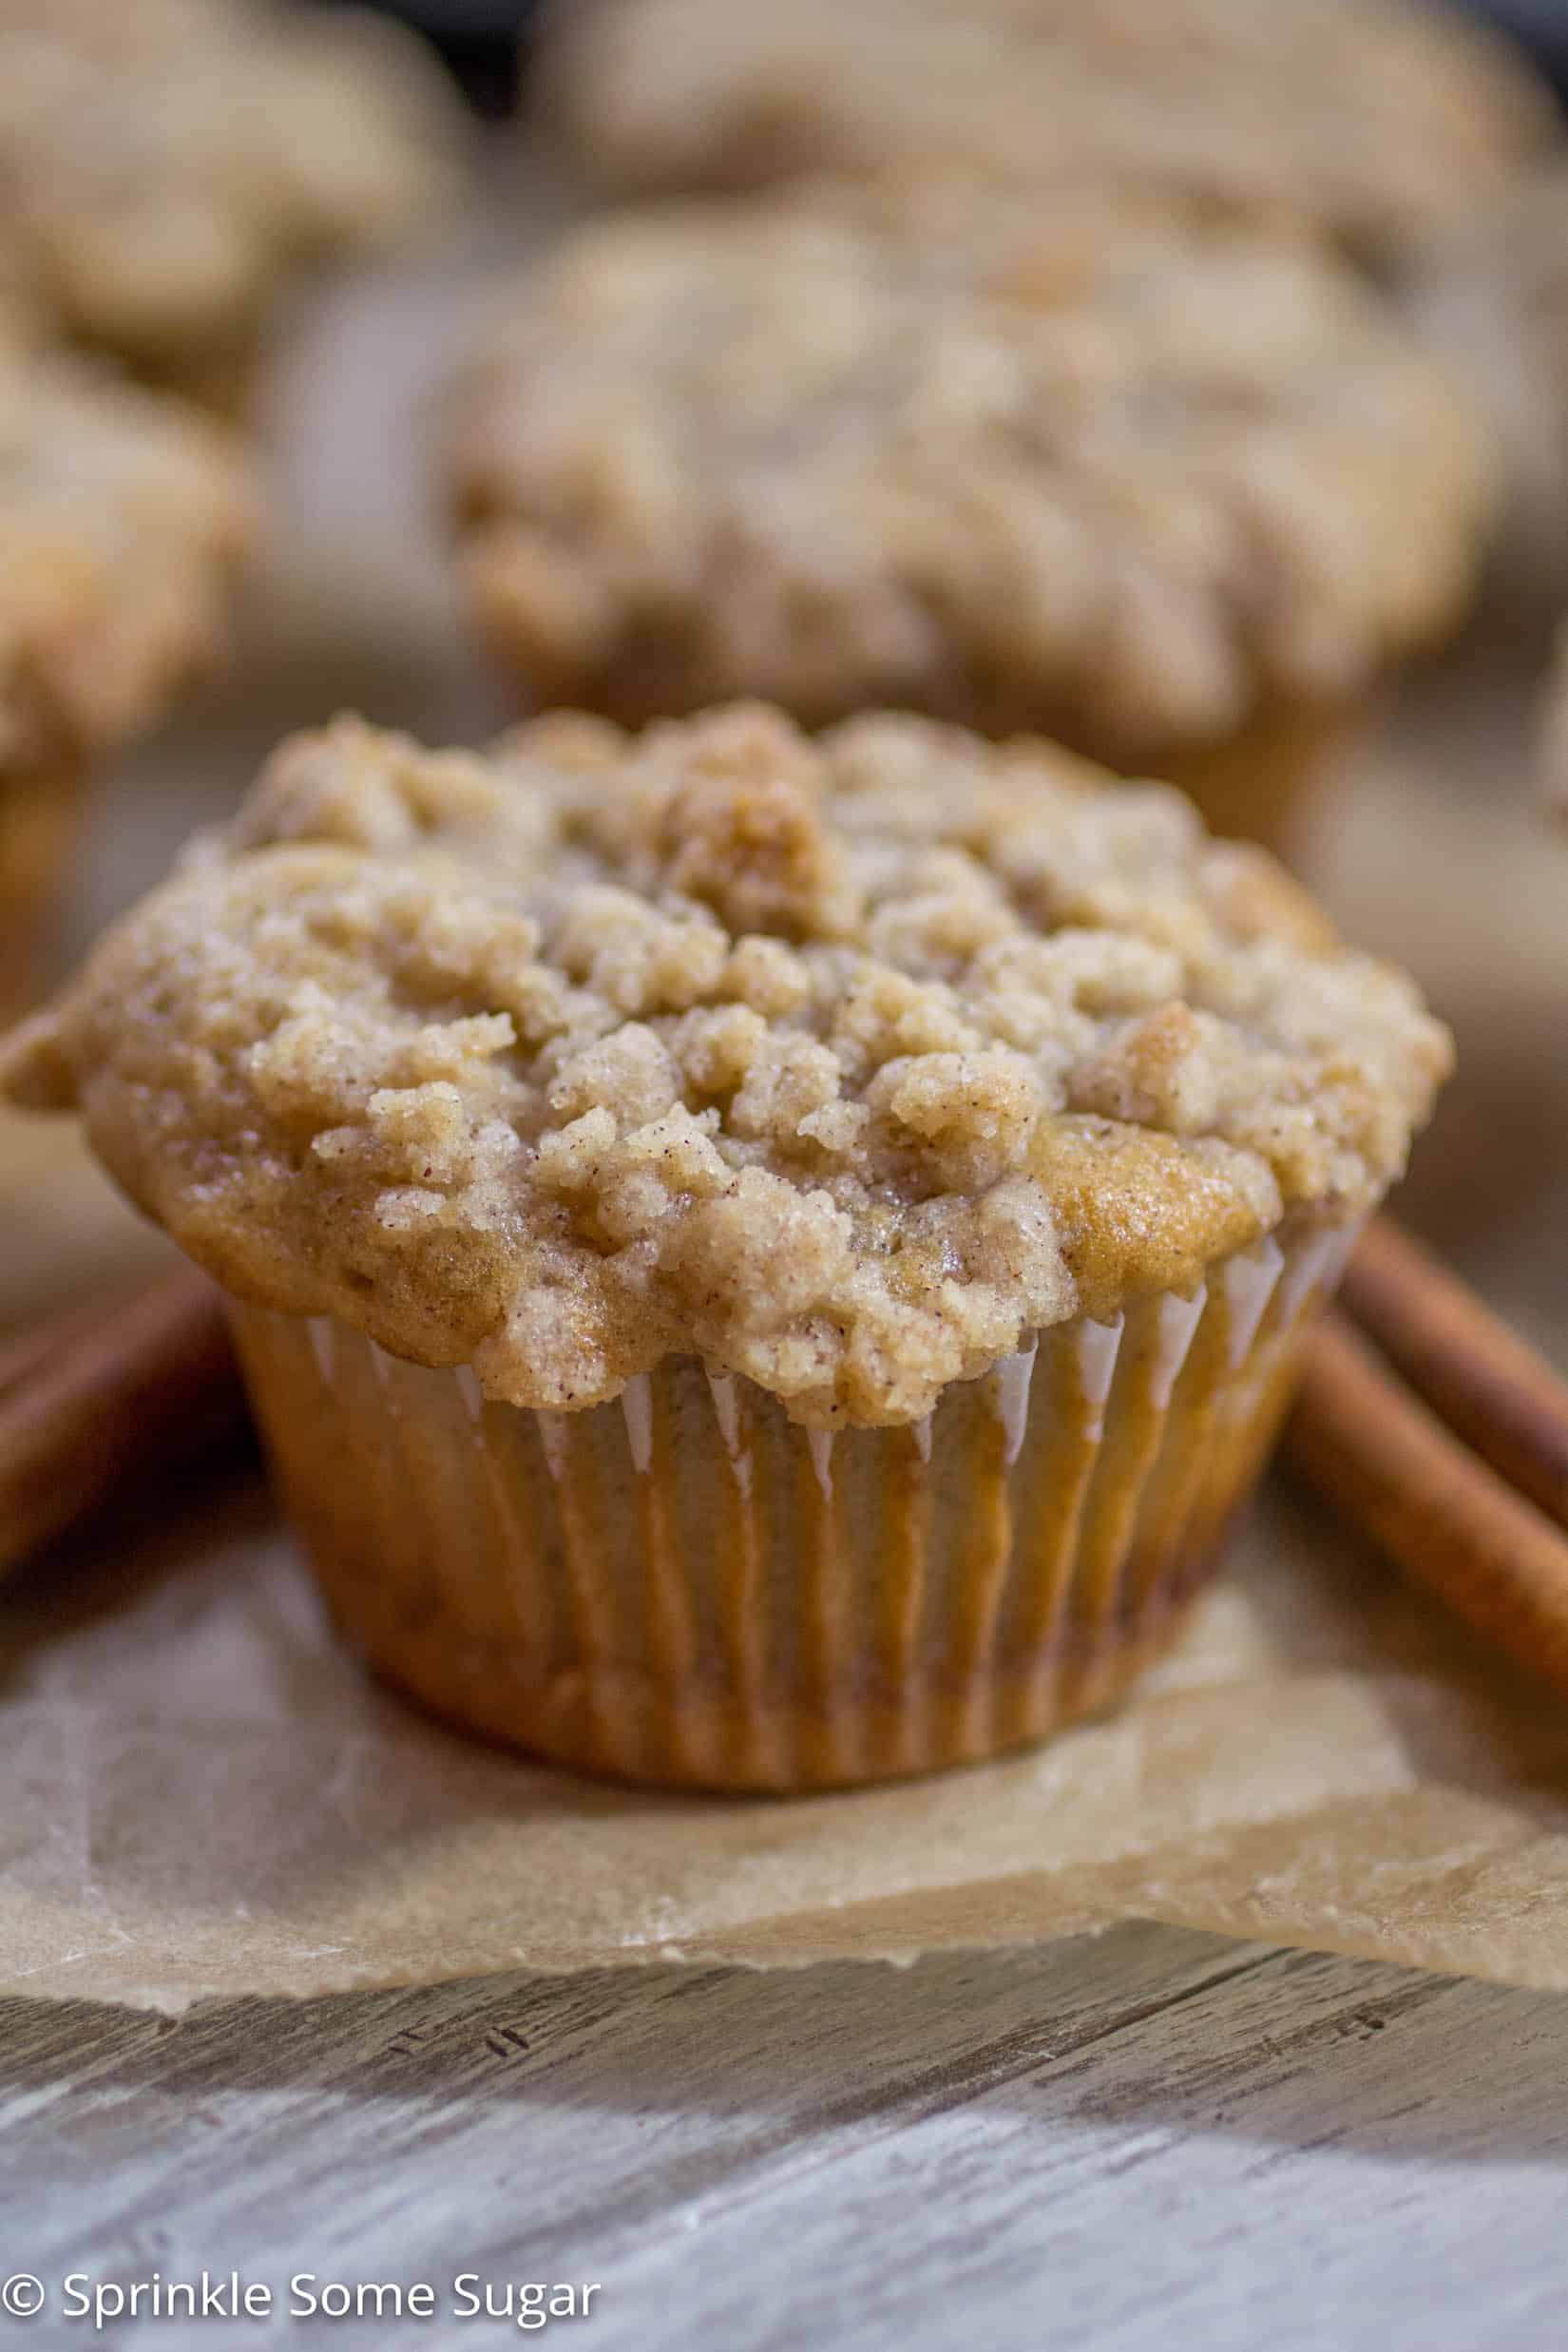 Cinnamon Swirl Coffee Cake Muffins - The most tender muffins with a gooey cinnamon center and topped with a sweet crumb topping!